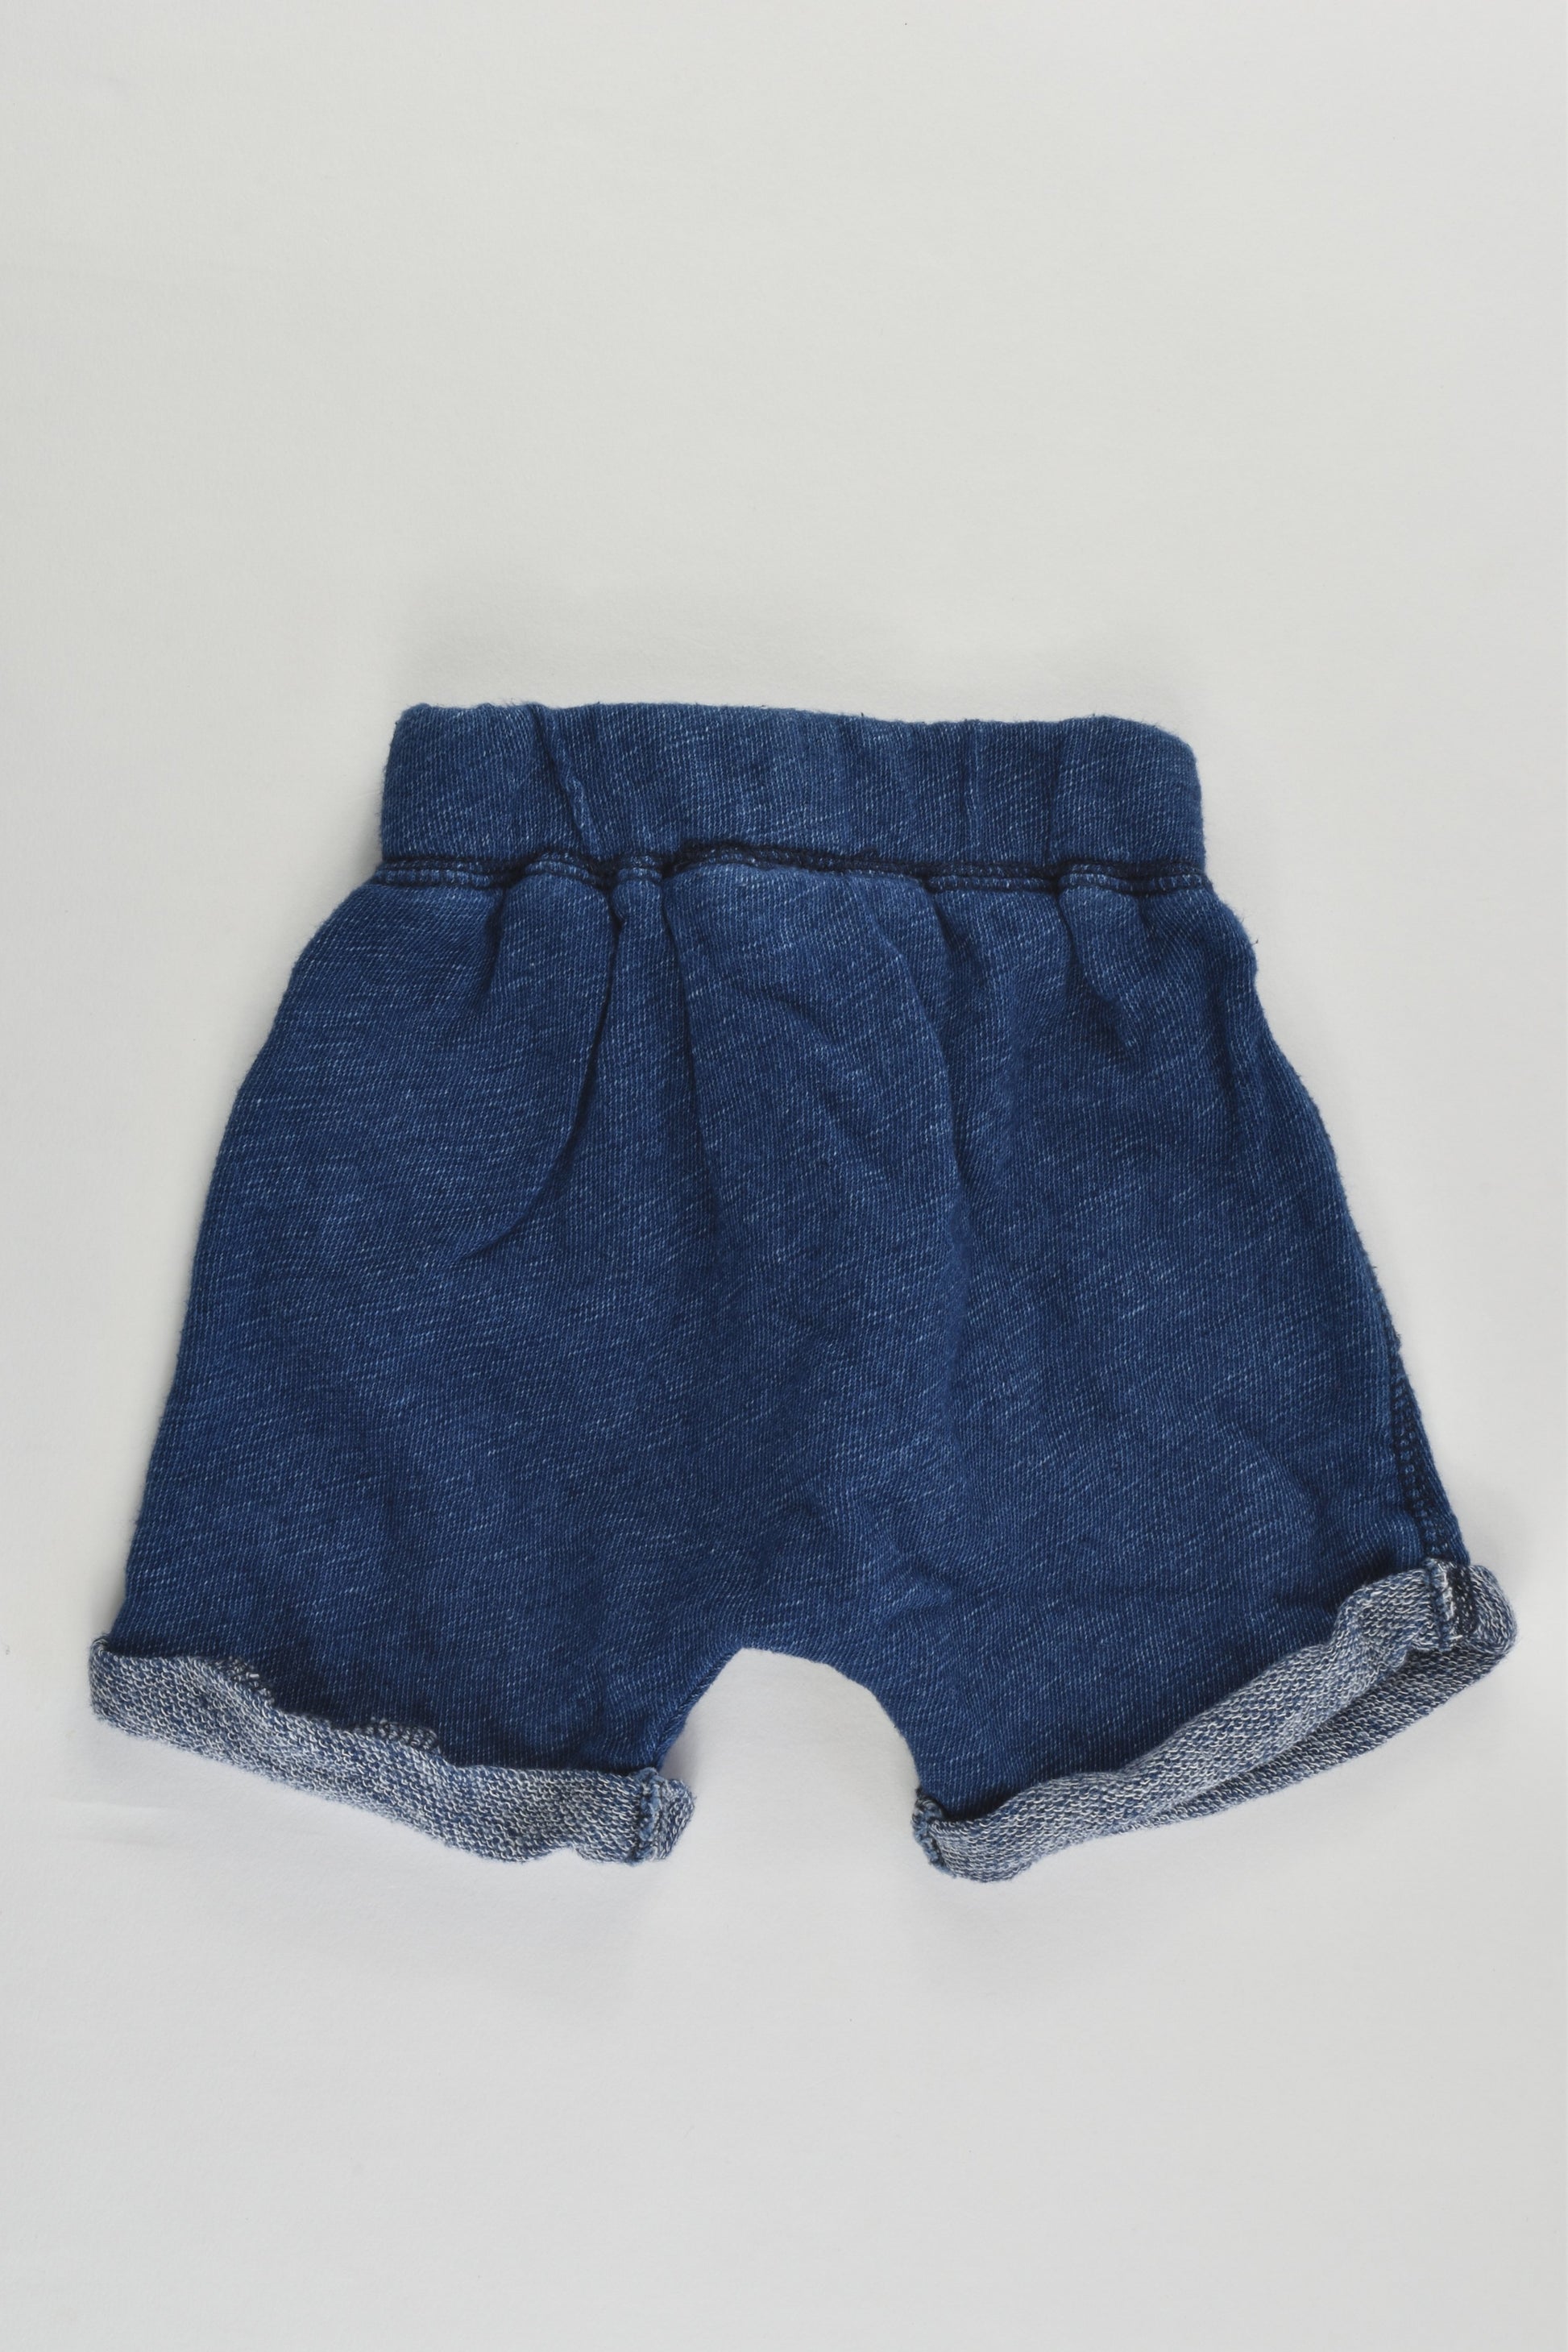 Cotton On Baby Size 000 (0-3 months) Shorts